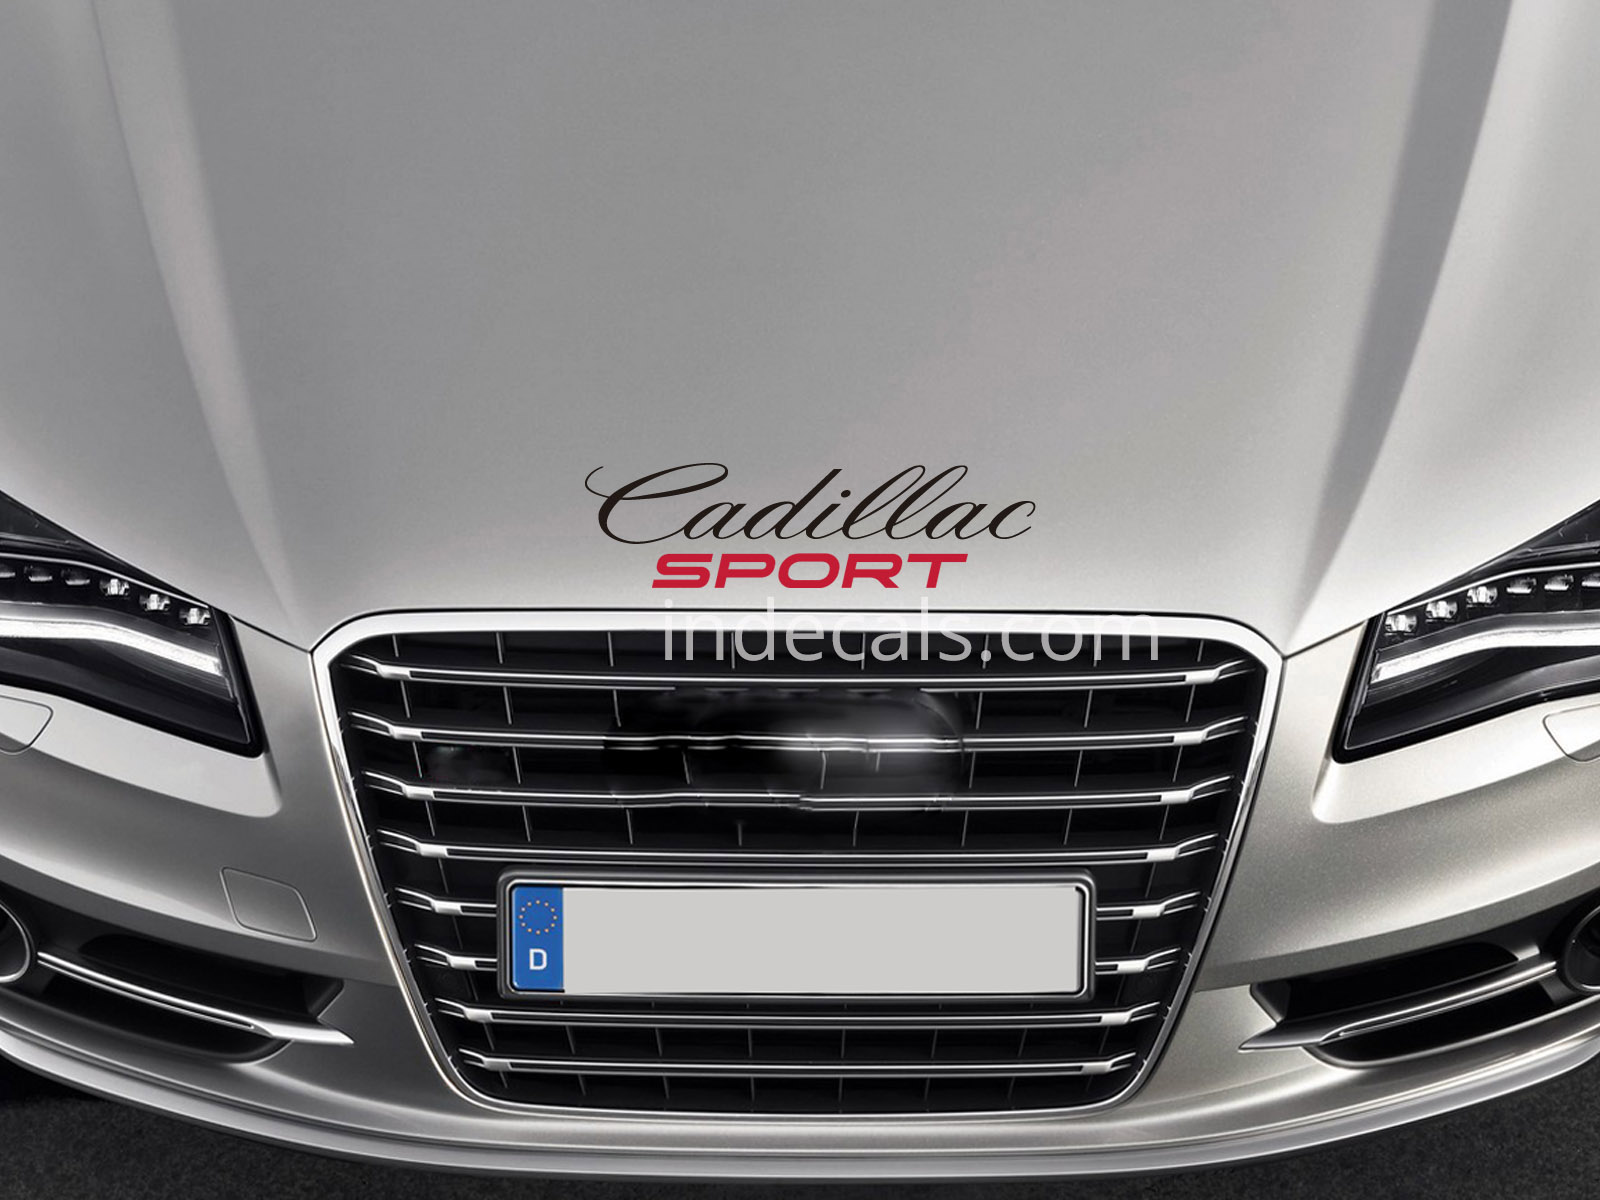 1 x Cadillac Sport Sticker for Bonnet - Black & Red